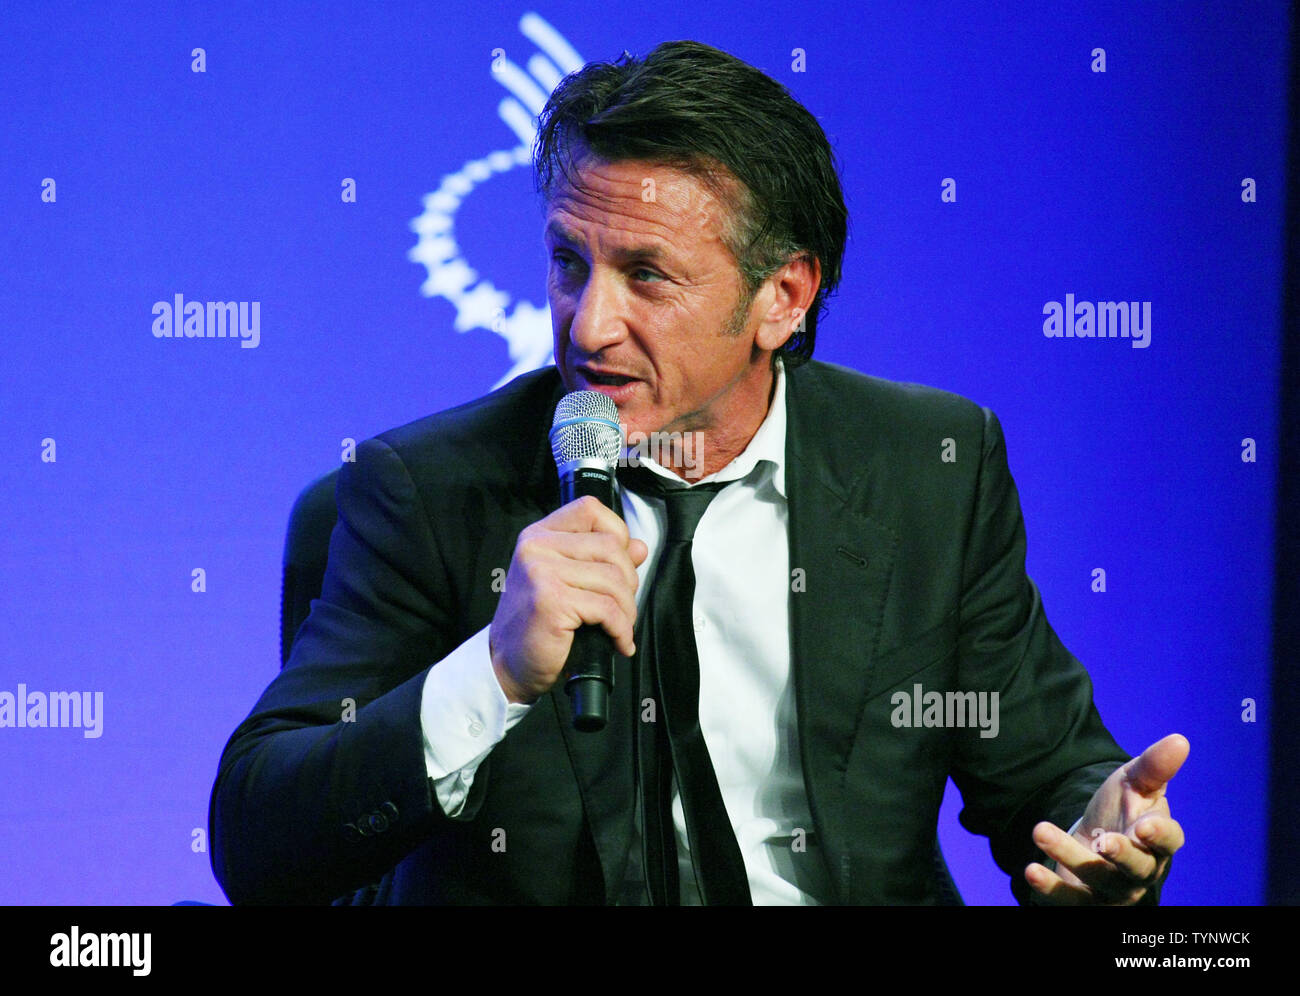 Sean Penn, Ambassador-at-Large for the Republic of Haiti and founder of  J/P Haitian Relief Organization, speaks at the 2013 Clinton Global Initiative Annual Meeting held at the Sheraton Hotel on September 25, 2013 in New York City. The annual event brings together global leaders who work on strategies to solve global problems such as poverty and social injustices.     UPI/Monika Graff Stock Photo